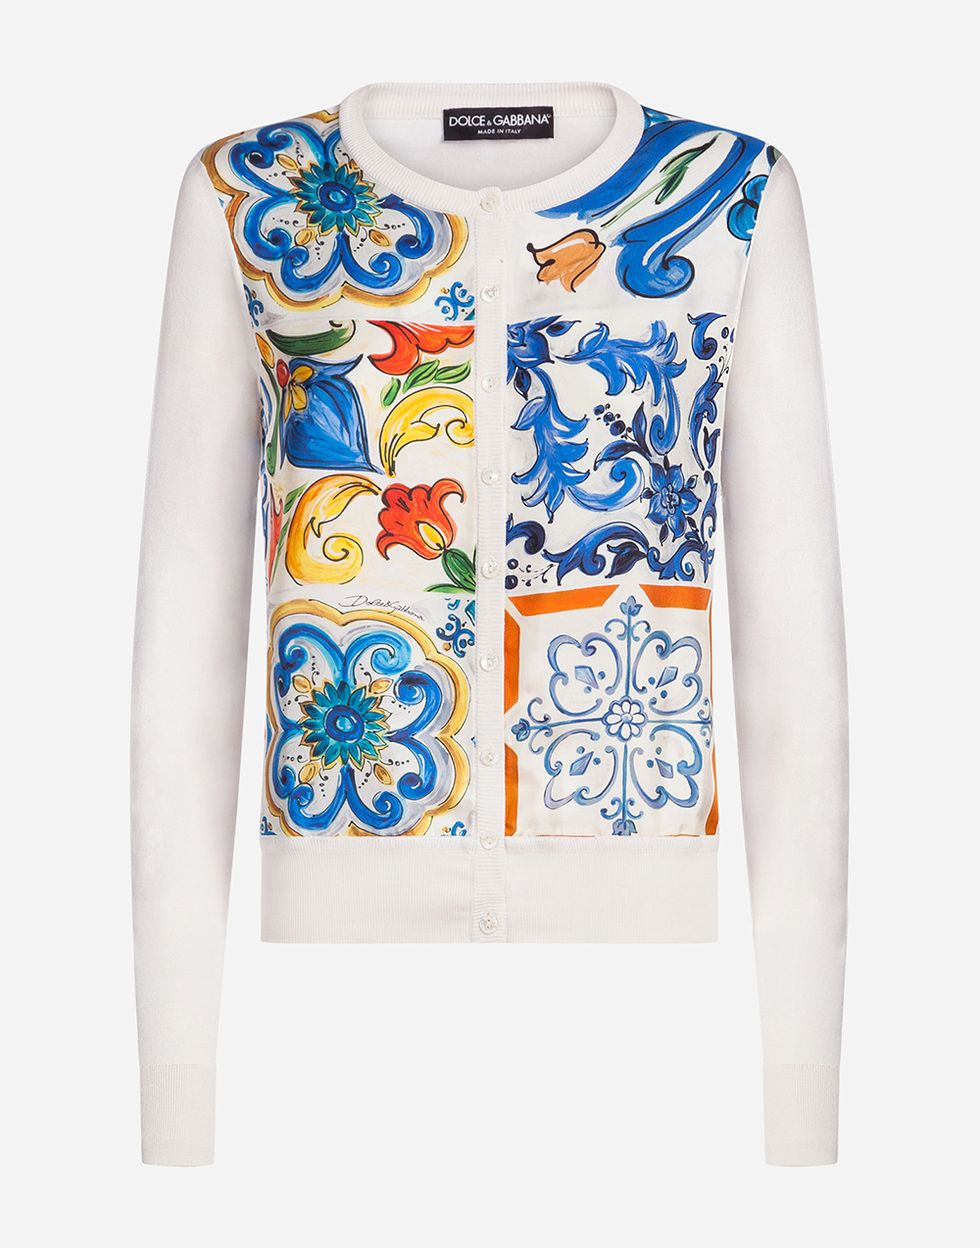 Clothing, White, Sleeve, Long-sleeved t-shirt, Outerwear, Blue, Sweater, Top, Design, Cardigan, 